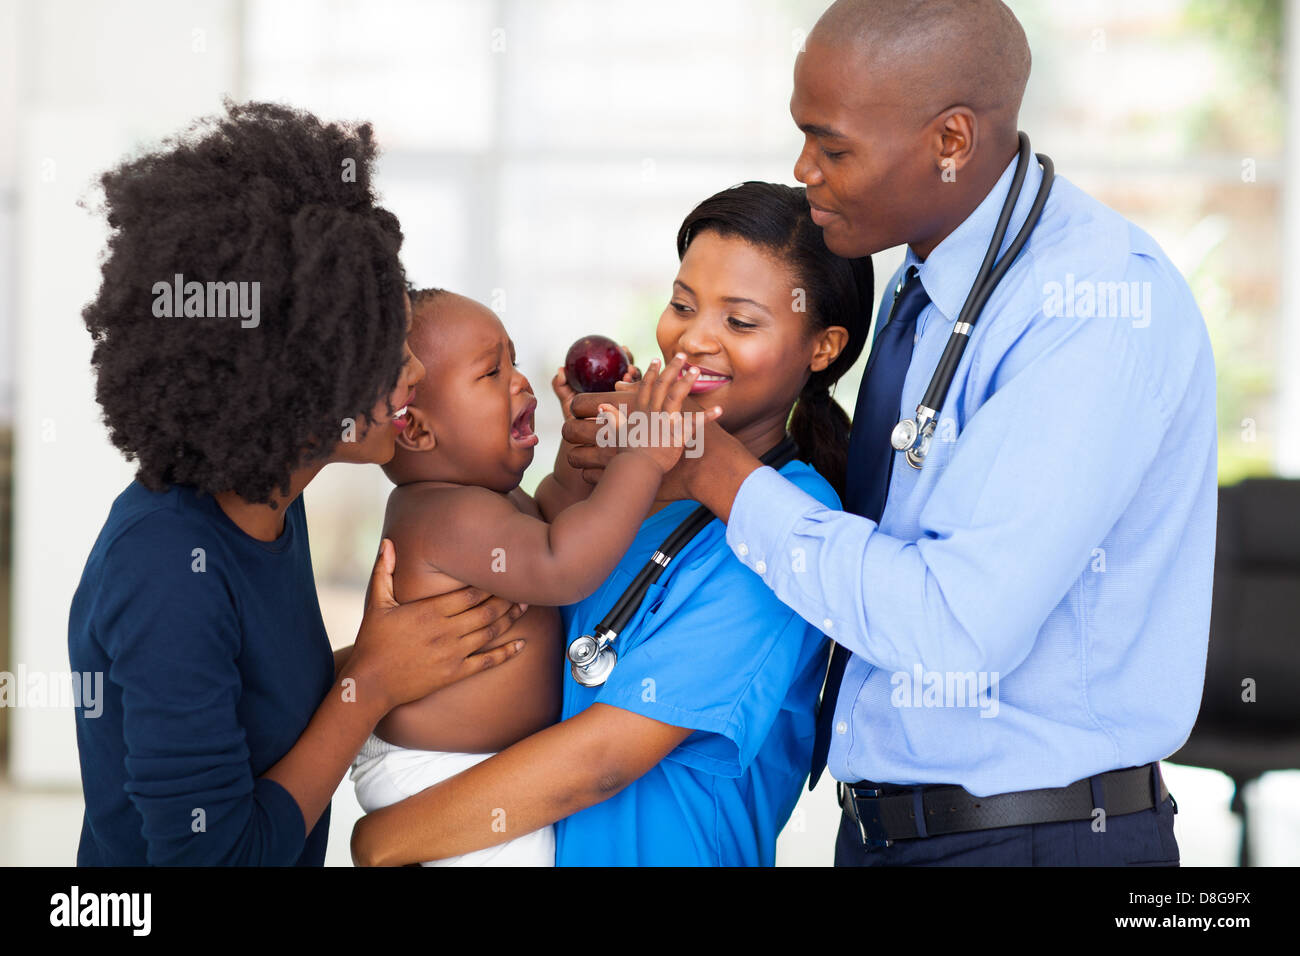 friendly nurse holding crying baby with mother and doctor Stock Photo